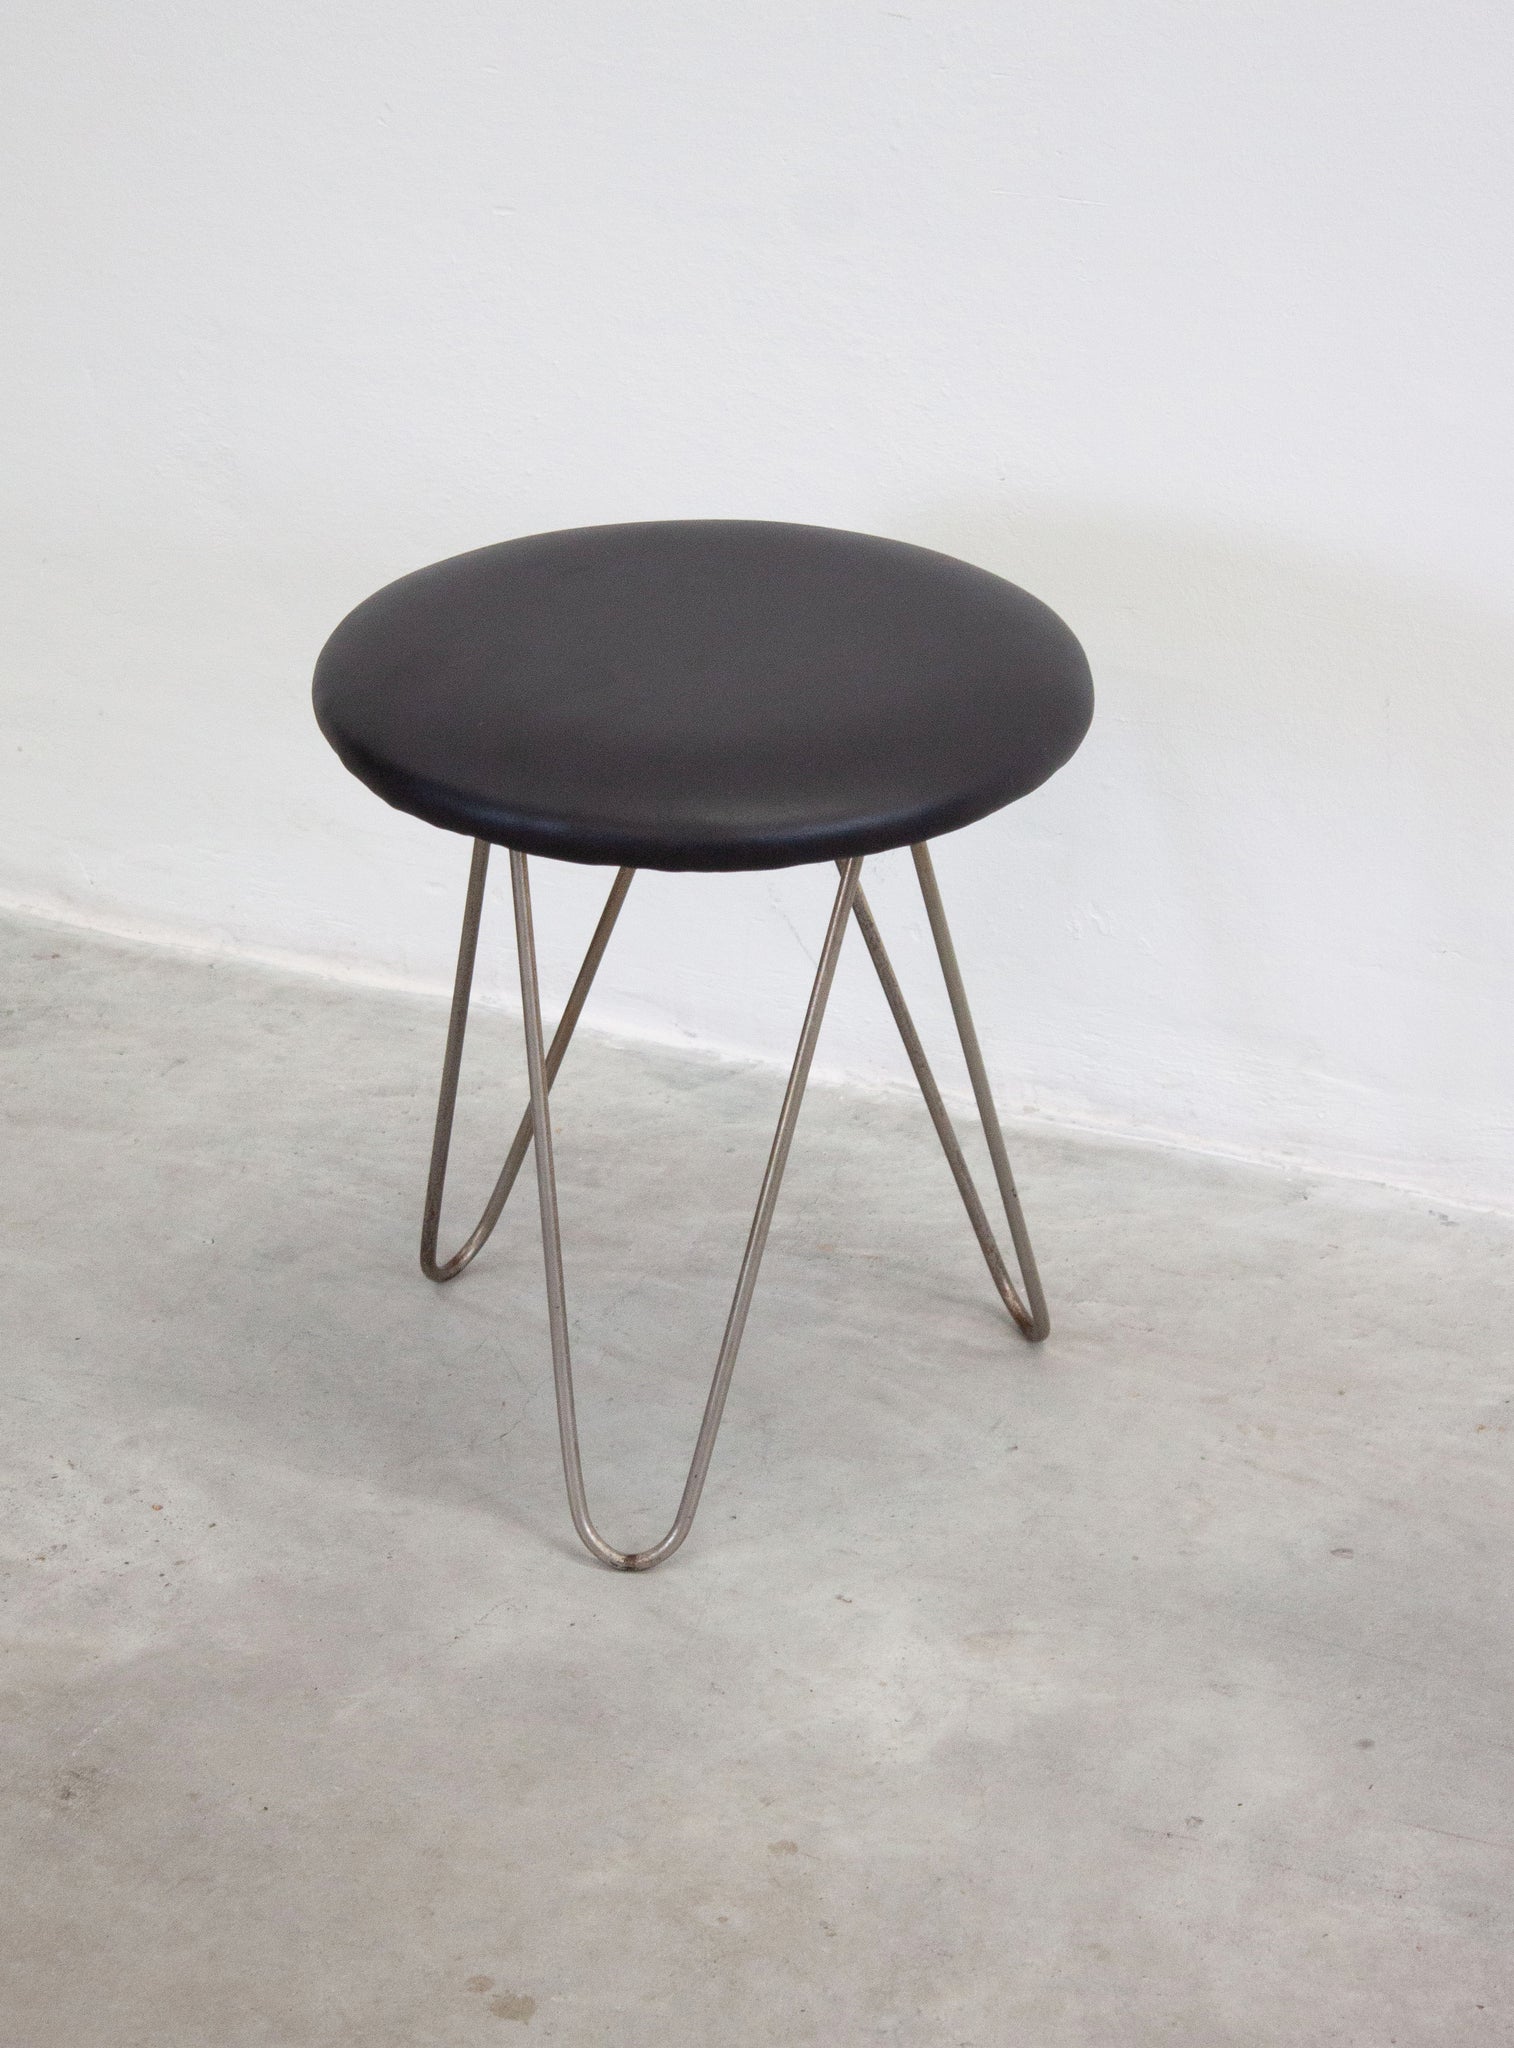 Vintage Stool with Hairpin Legs (Black)